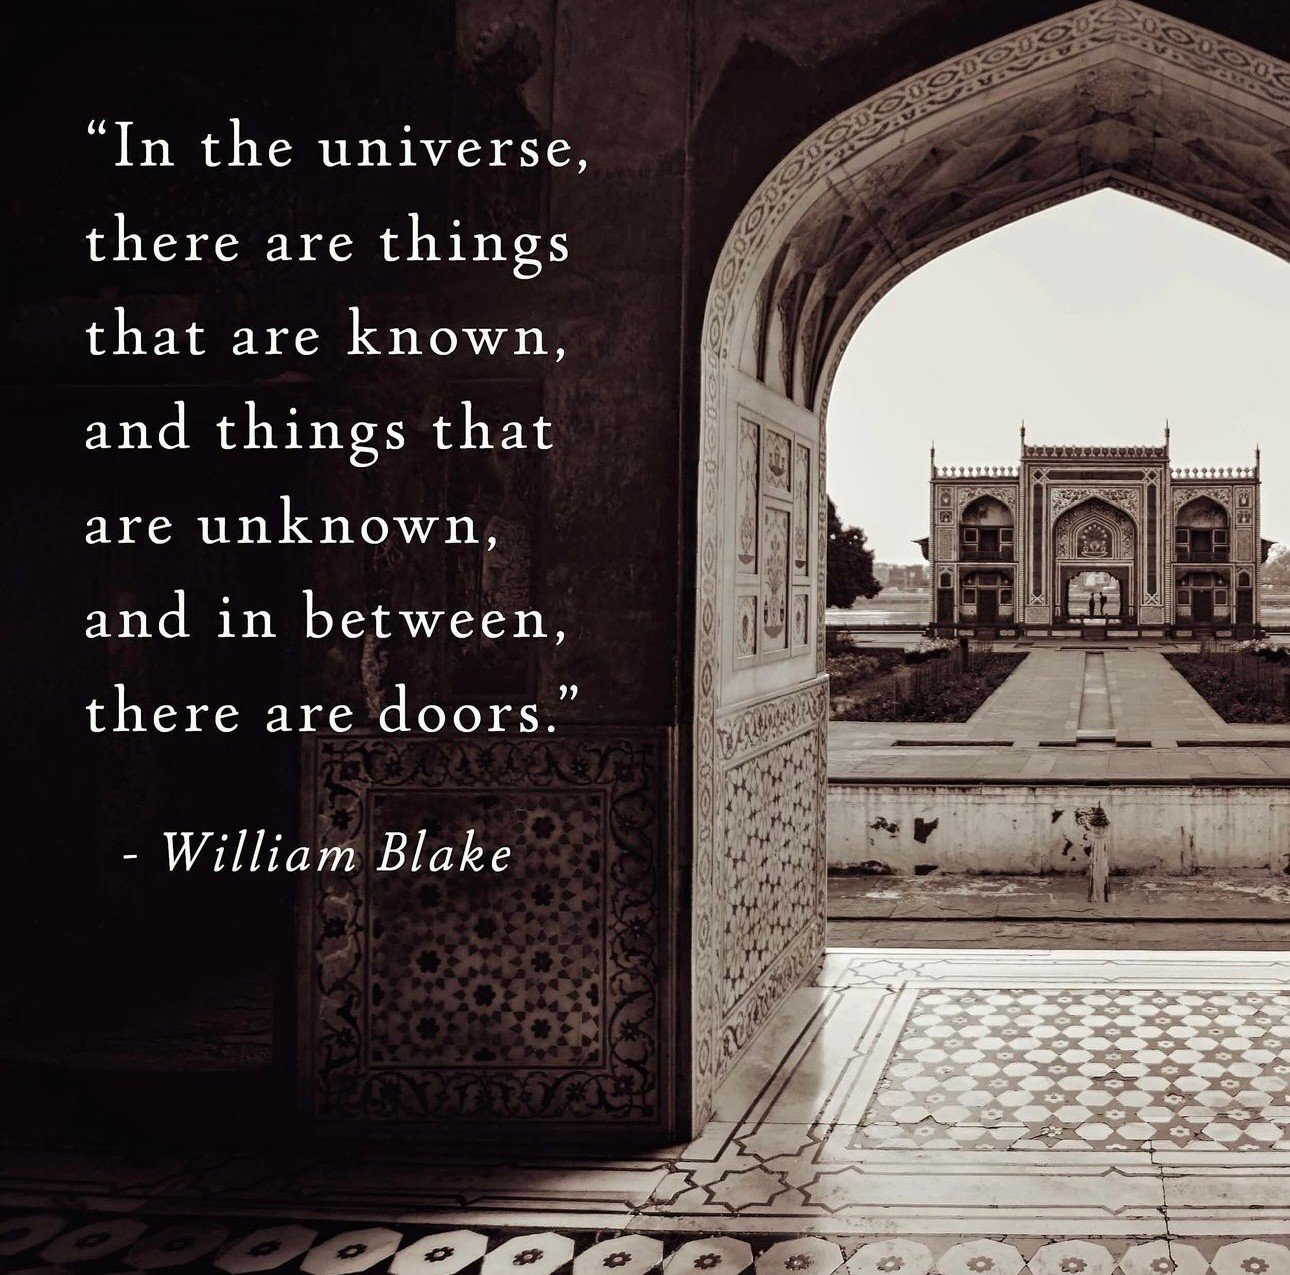 &quot;In the universe there are things that are known, and things that are unknown, and in between, there are doors.&quot; - William Blake⁠
⁠
Beauty can often feel like one of those unknown, intangible, and difficult to define elements of design.  In